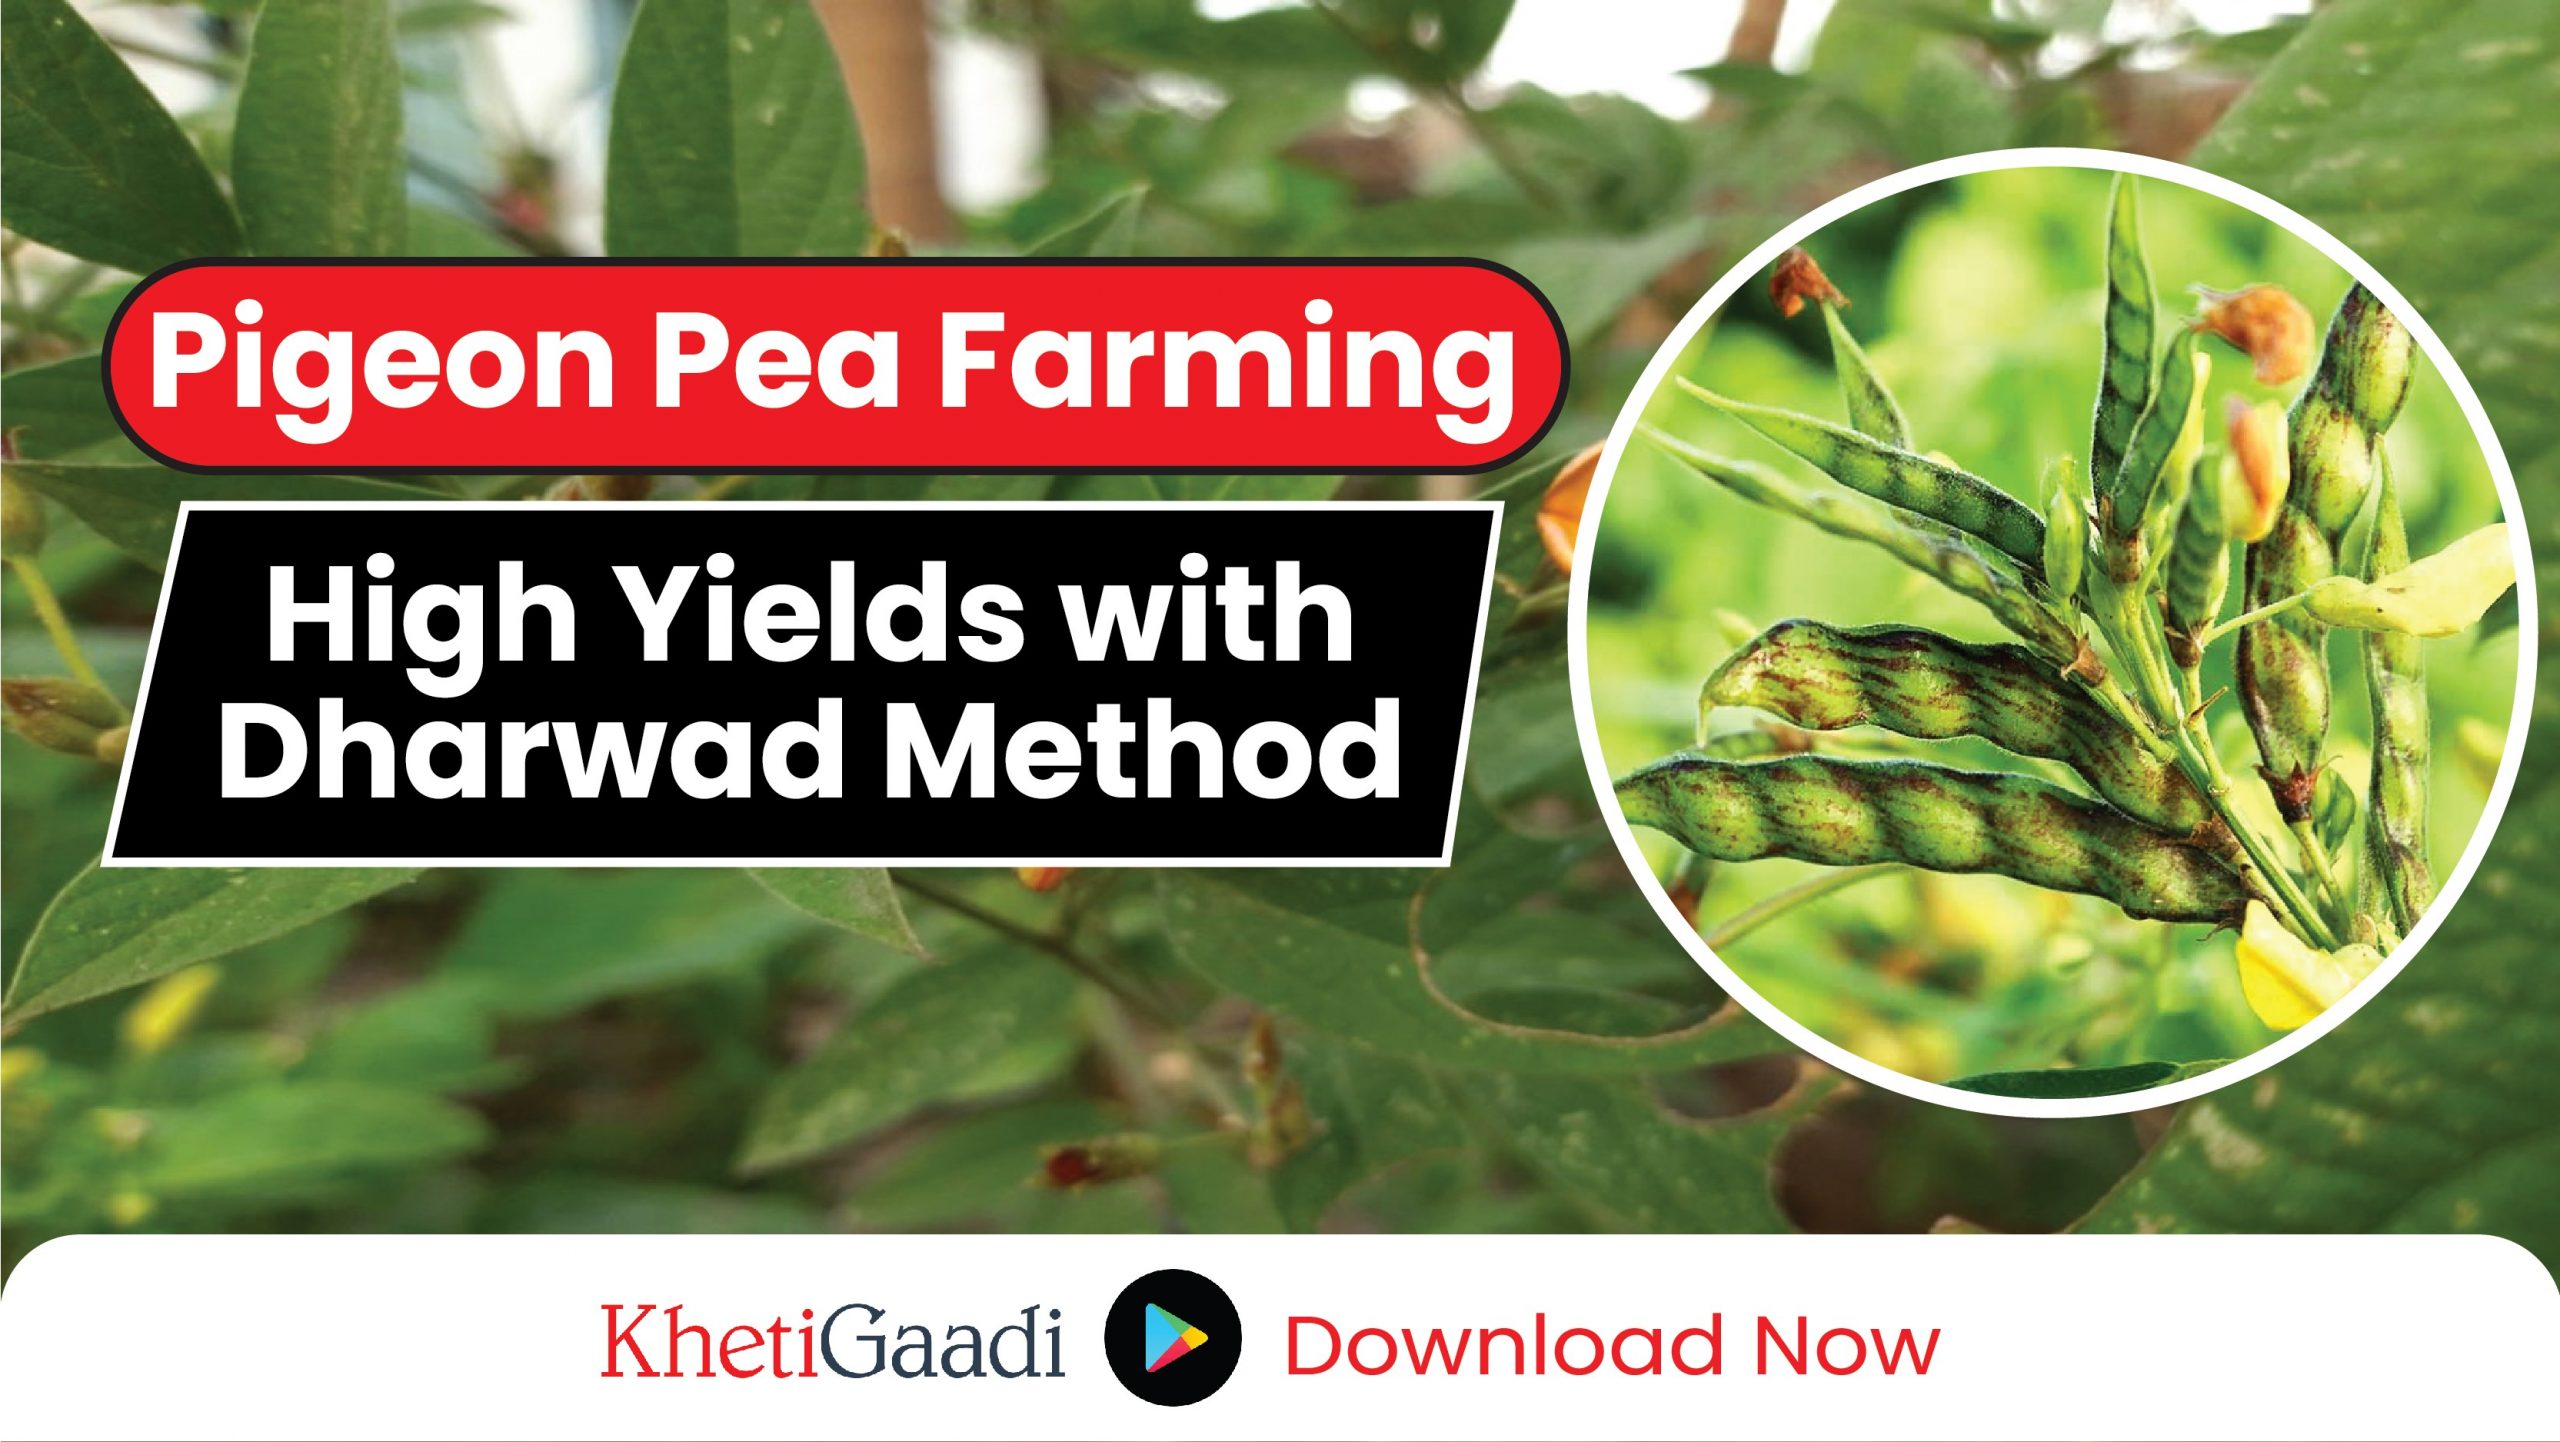 Boost Pigeon Pea Production with the ‘Dharwad Method’